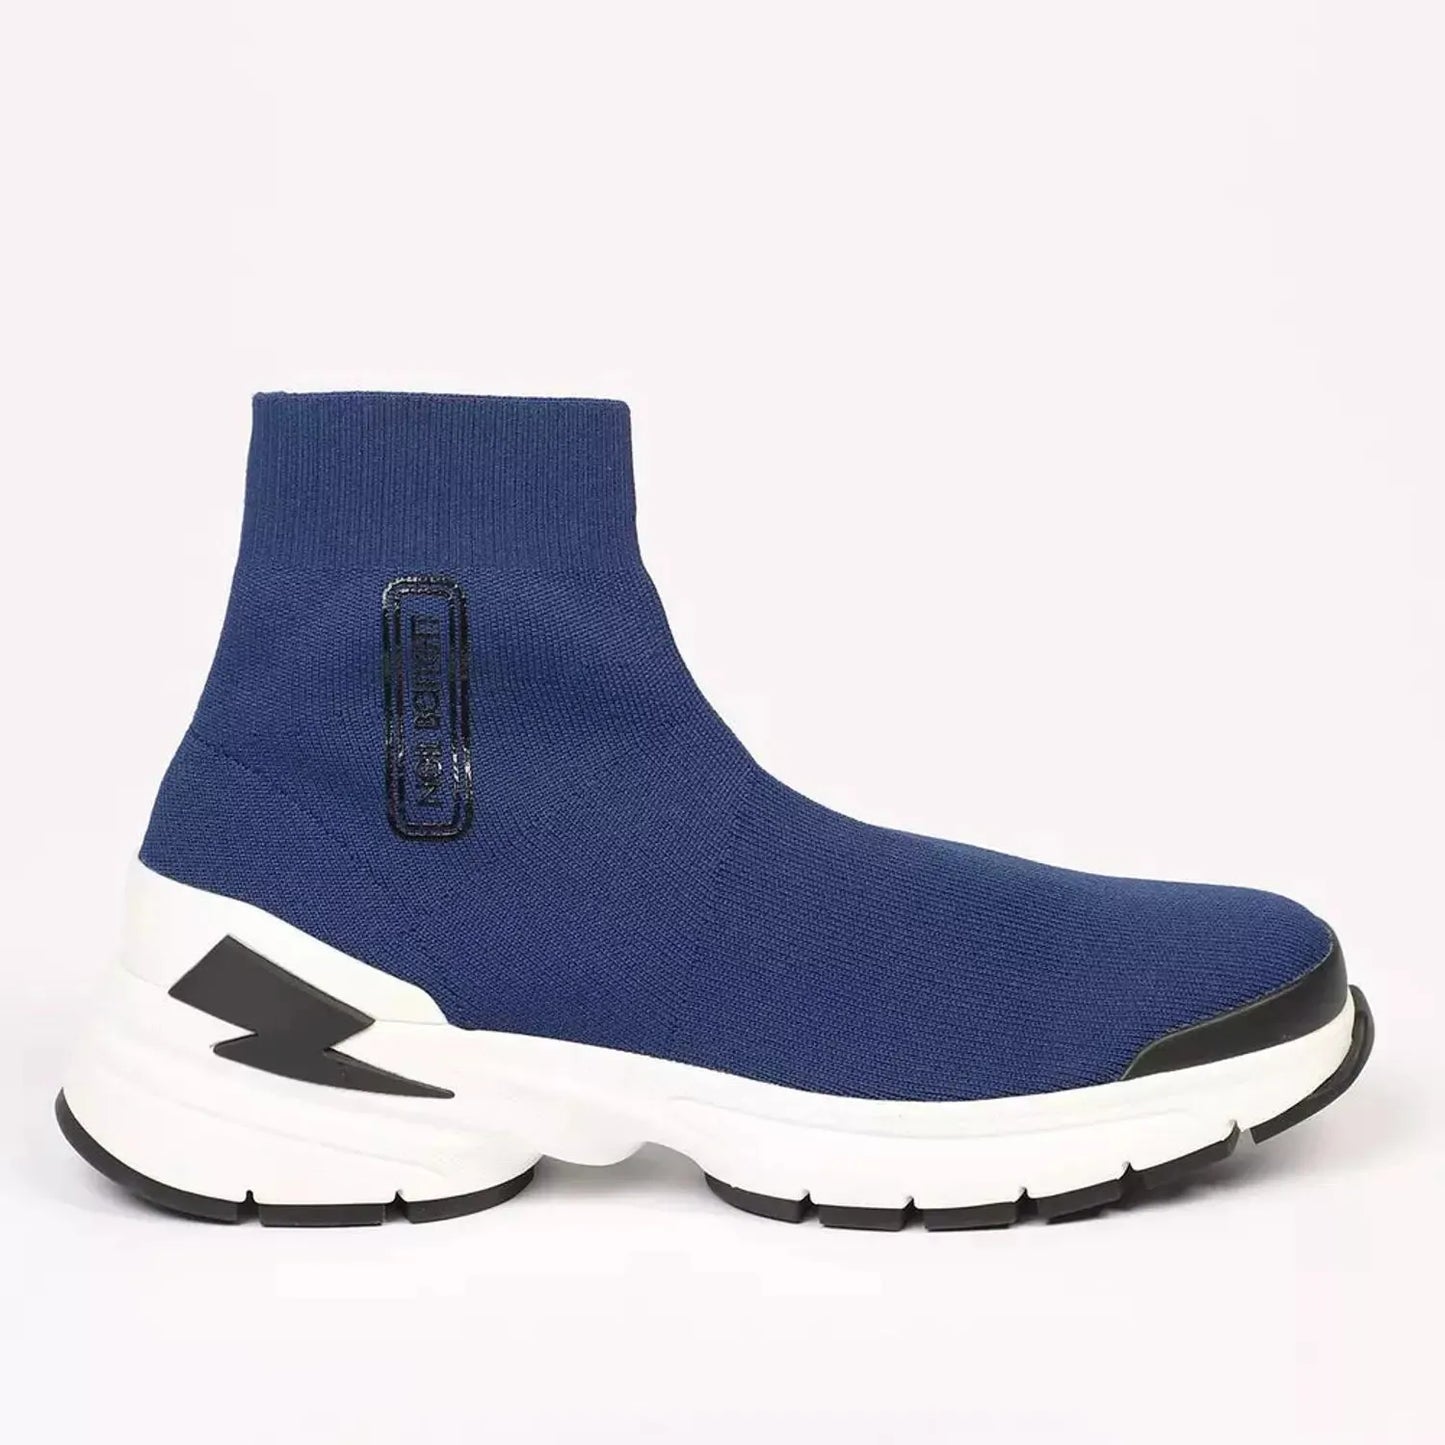 Neil Barrett Electric Bolt Sock Sneakers in Blue blue-textile-lining-sneaker stock_product_image_21105_132585486-30-d613a1bb-2b2.webp